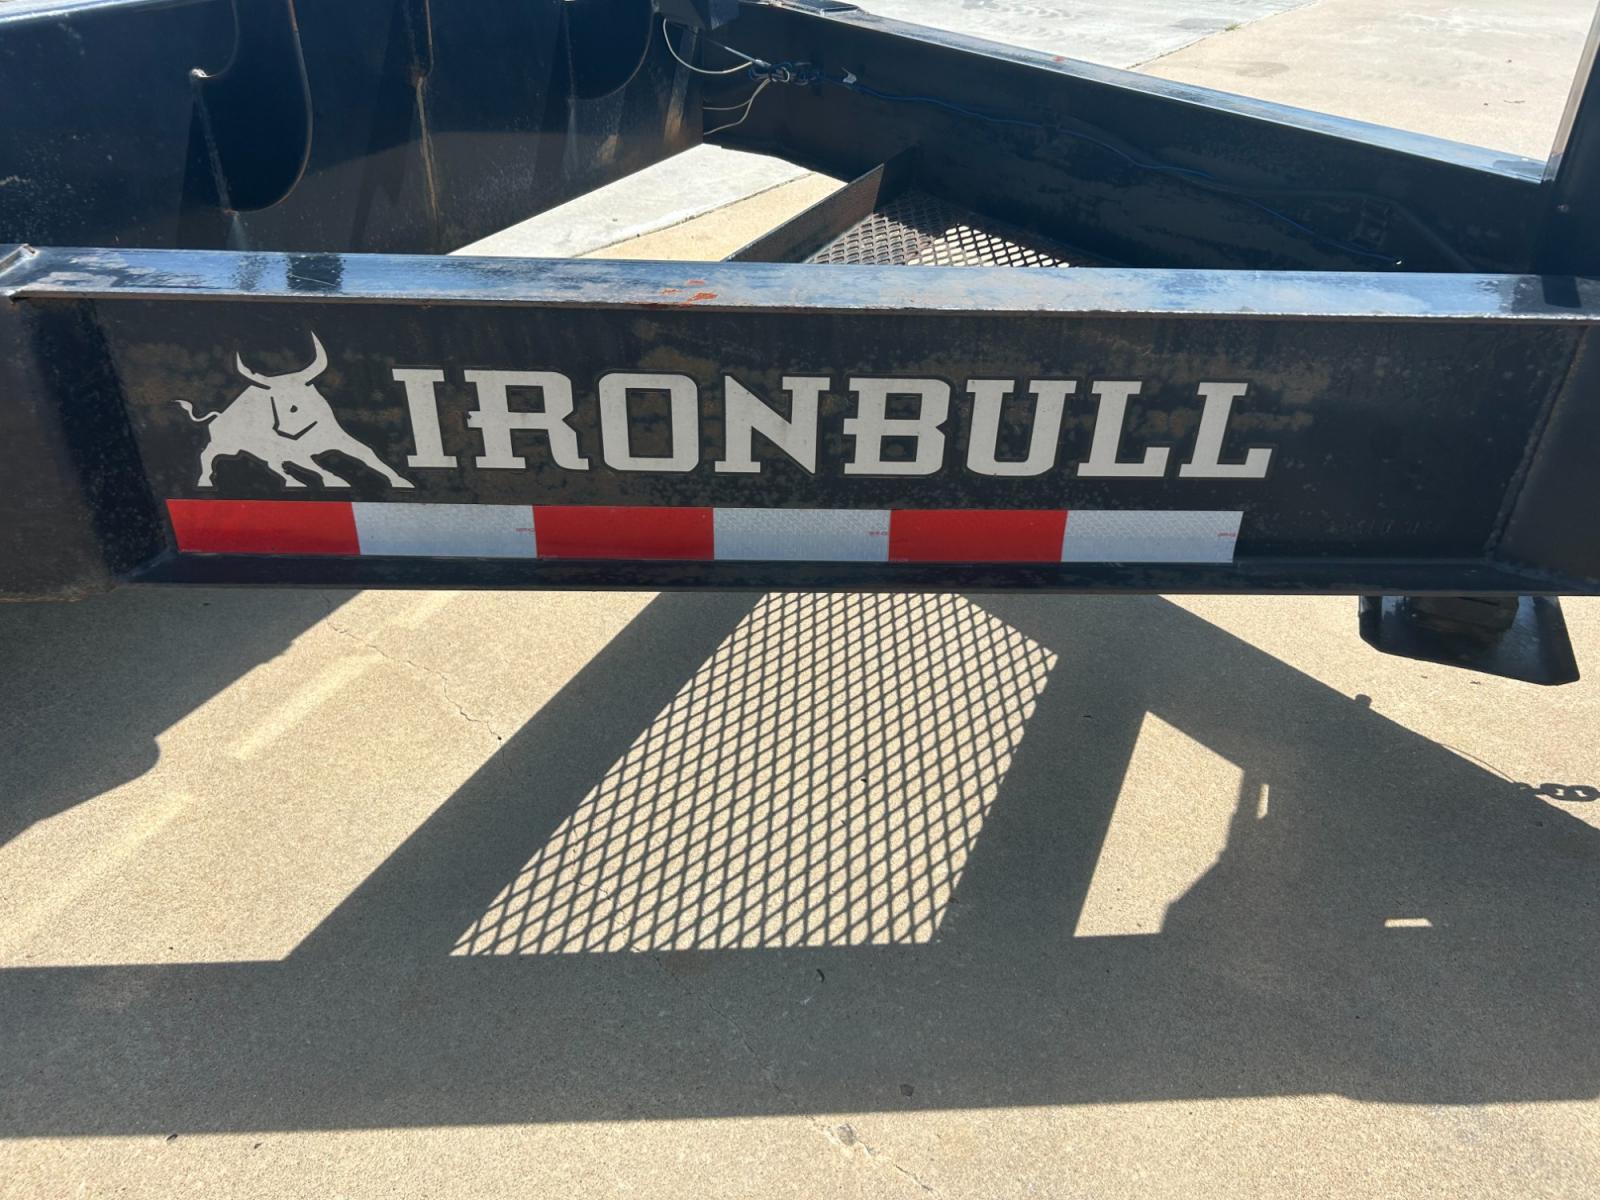 2022 BLACK Norstar Trailers IRONBULL (50HFP2426N1) , located at 17760 Hwy 62, Morris, OK, 74445, 35.609104, -95.877060 - 2022 IRONBULL TRAILER FEATURES 10" I-BEAM FRAME AND TONGUE, 2 5/16'' ADJUSTABLE COUPLER, 3'' STRUCTURAL CROSSMEMBERS, DECK HEIGHT 33'', RUB RAIL, STAKE POCKETS, PIPE SPOOLS, CAMBERED SPRING AXLES, MULTI-LEAF SLIPPER SPRING SUSPENSION, E-Z LUBE HUBS, 2 ELECTRIC BREAK AXLES, FULL 93' WIDE DECKOVER, 8 - Photo #11